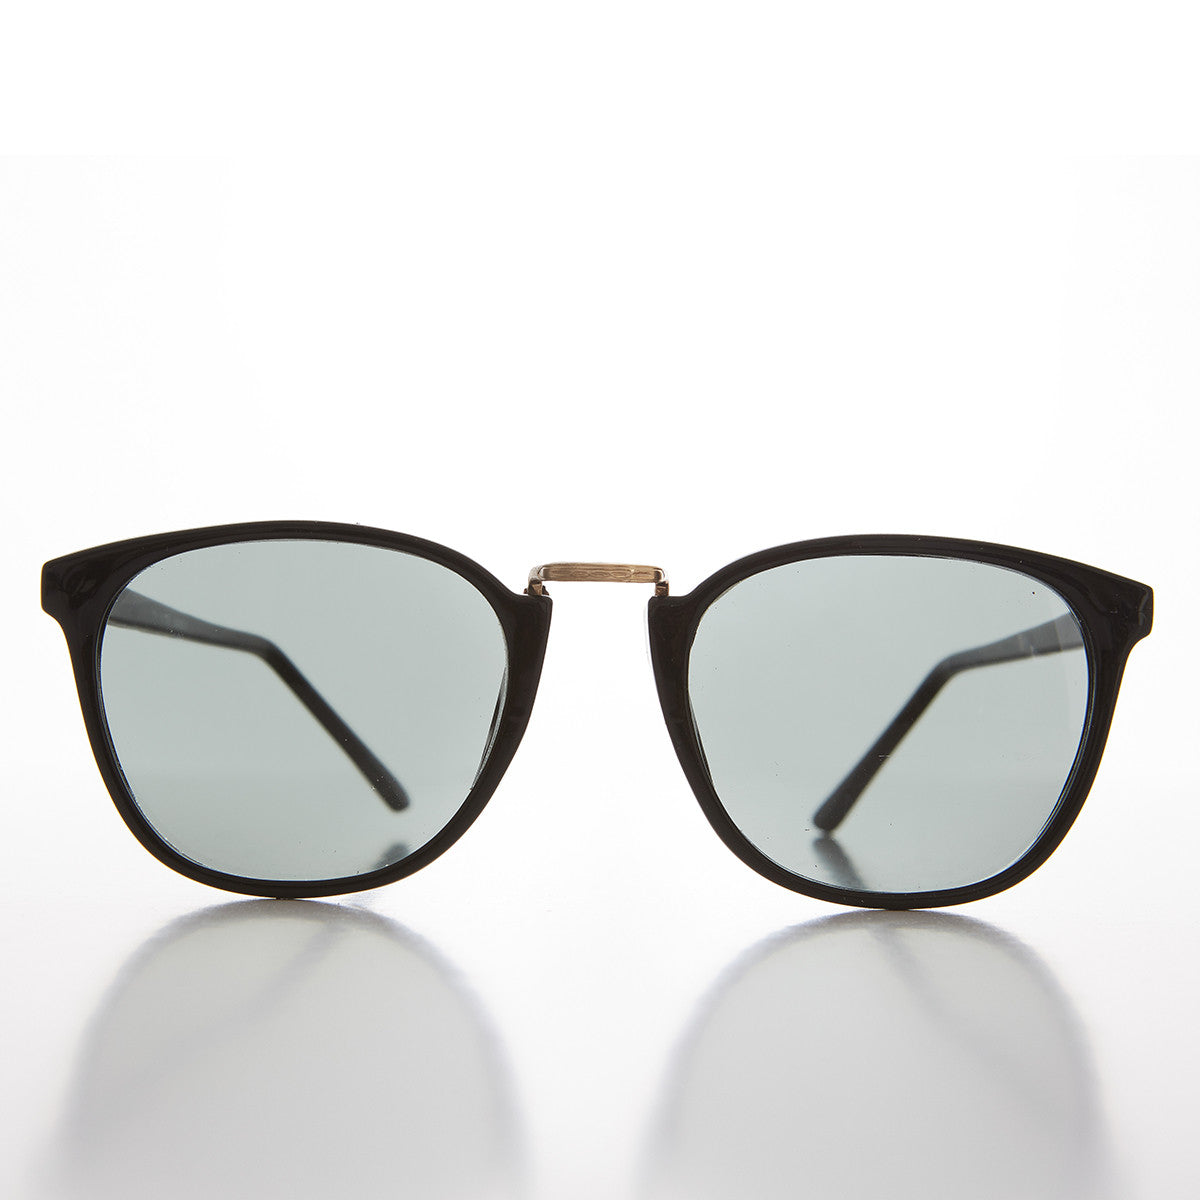 Hipster Square Classic Horn Rim Vintage Sunglass